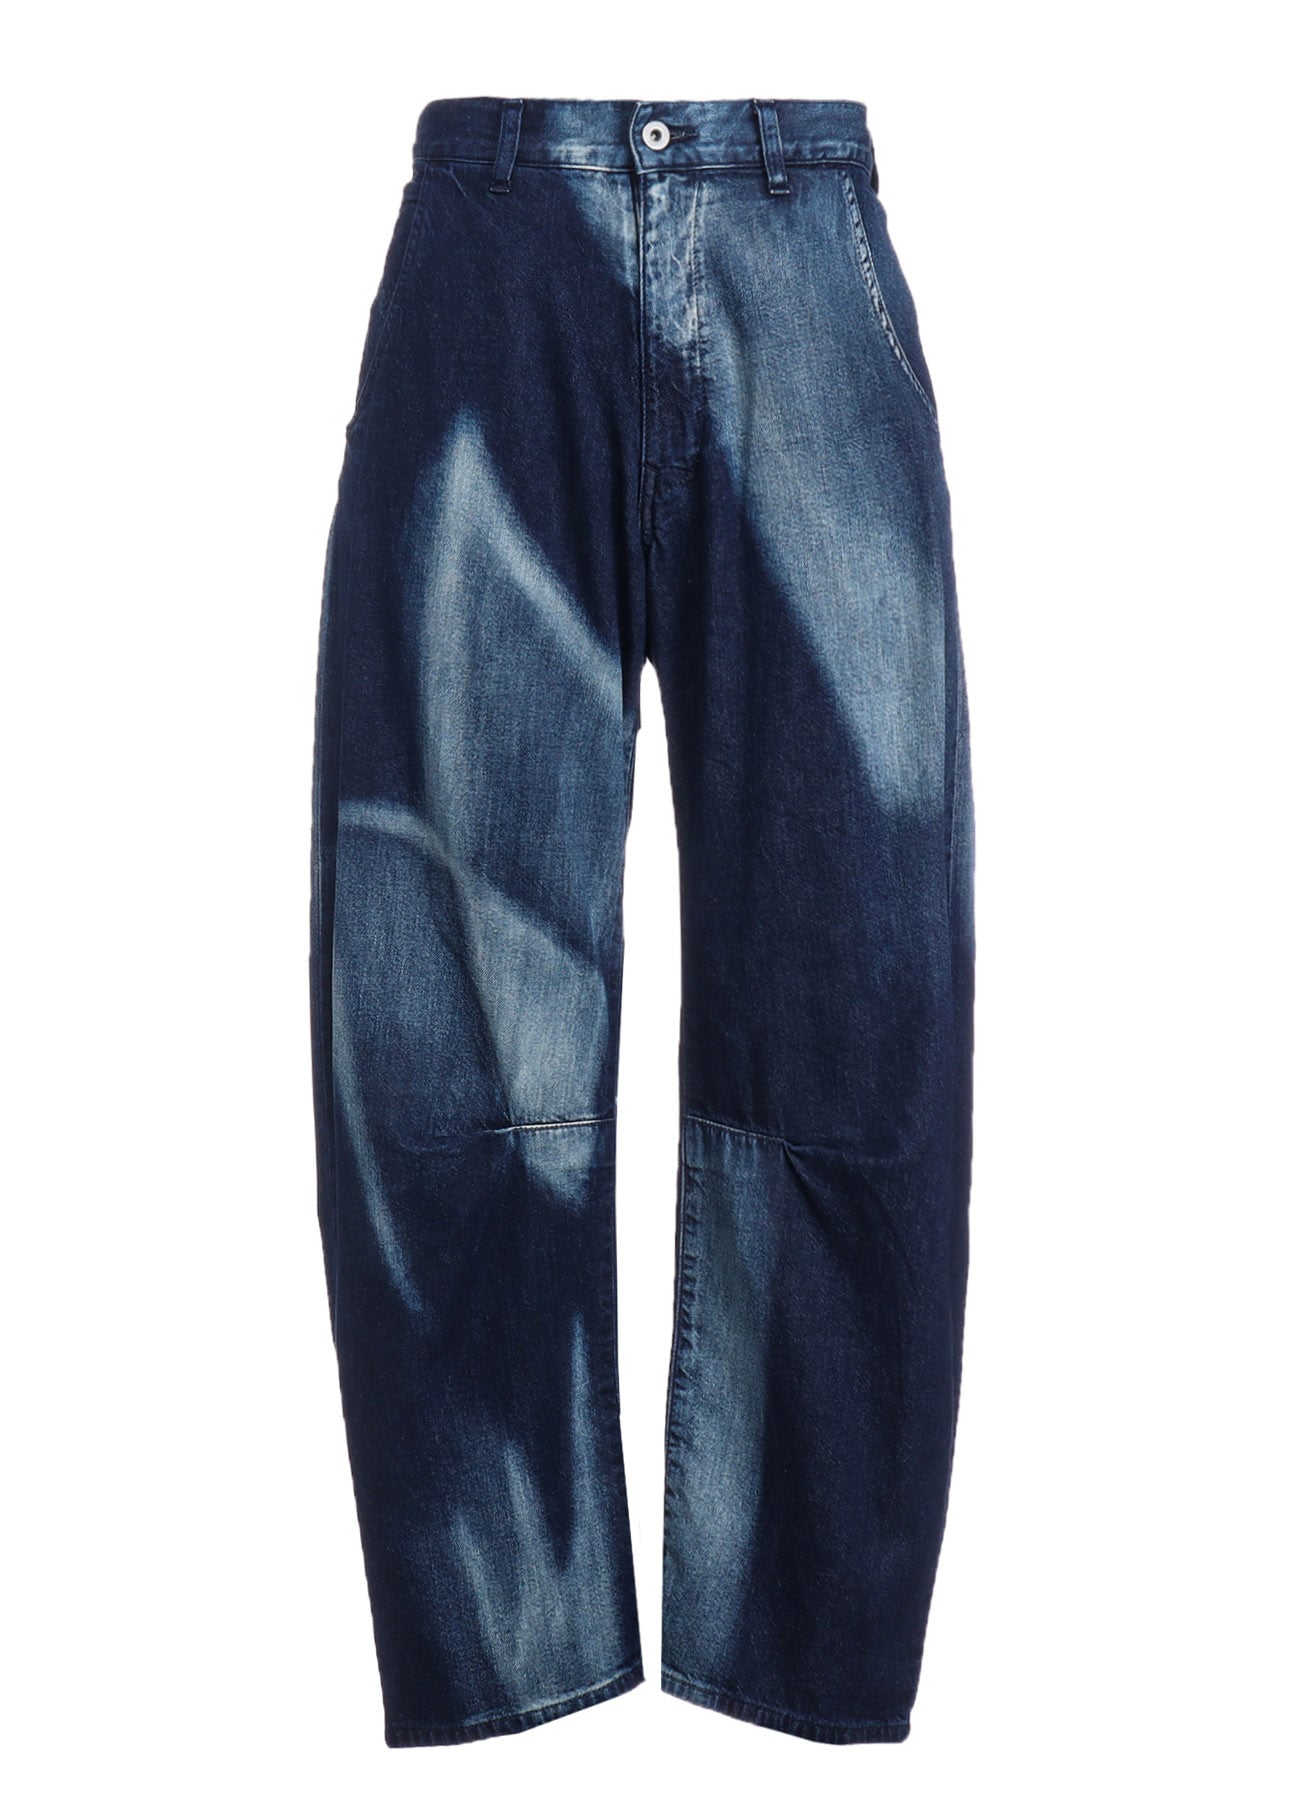 【8/2 12:00 Release】C/ SPOTTED DENIM GUSSET WIDE PANTS